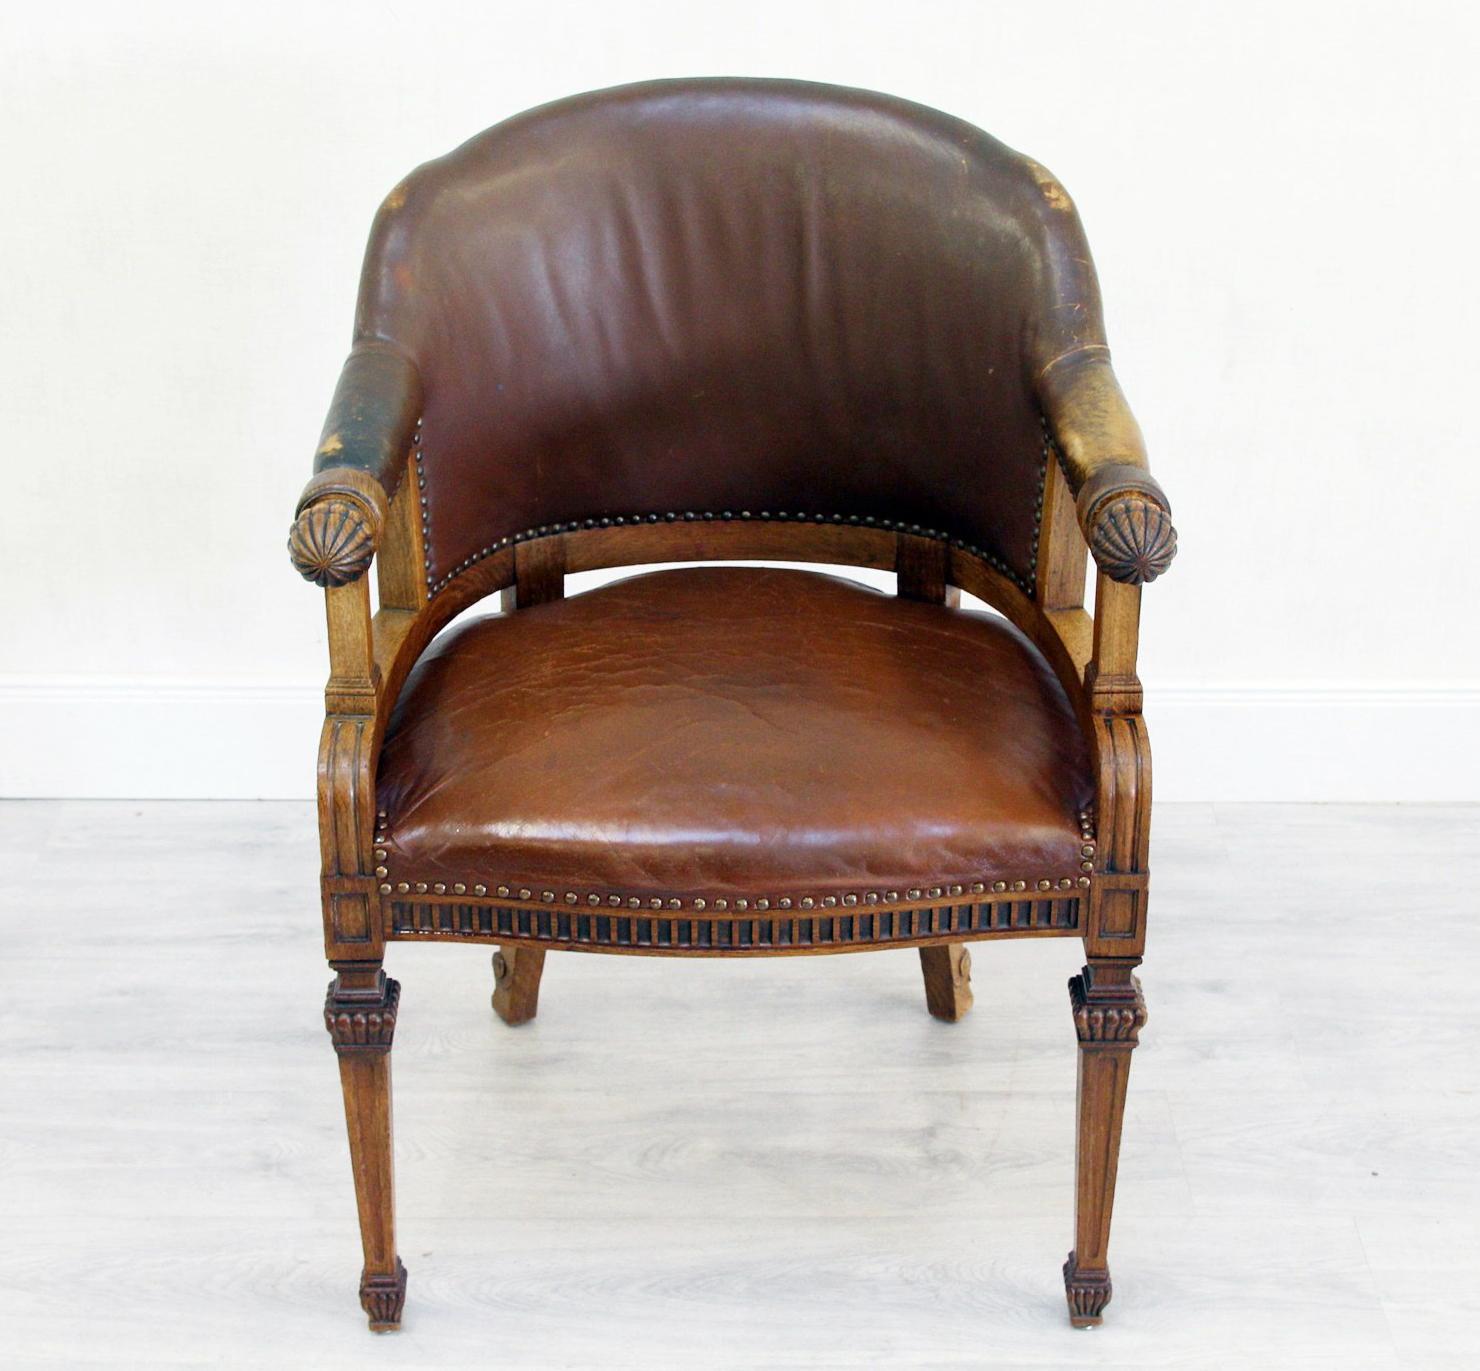 Antique office armchair
1880-1900

Condition: The chair is in good condition for its age and still has the charm of the 